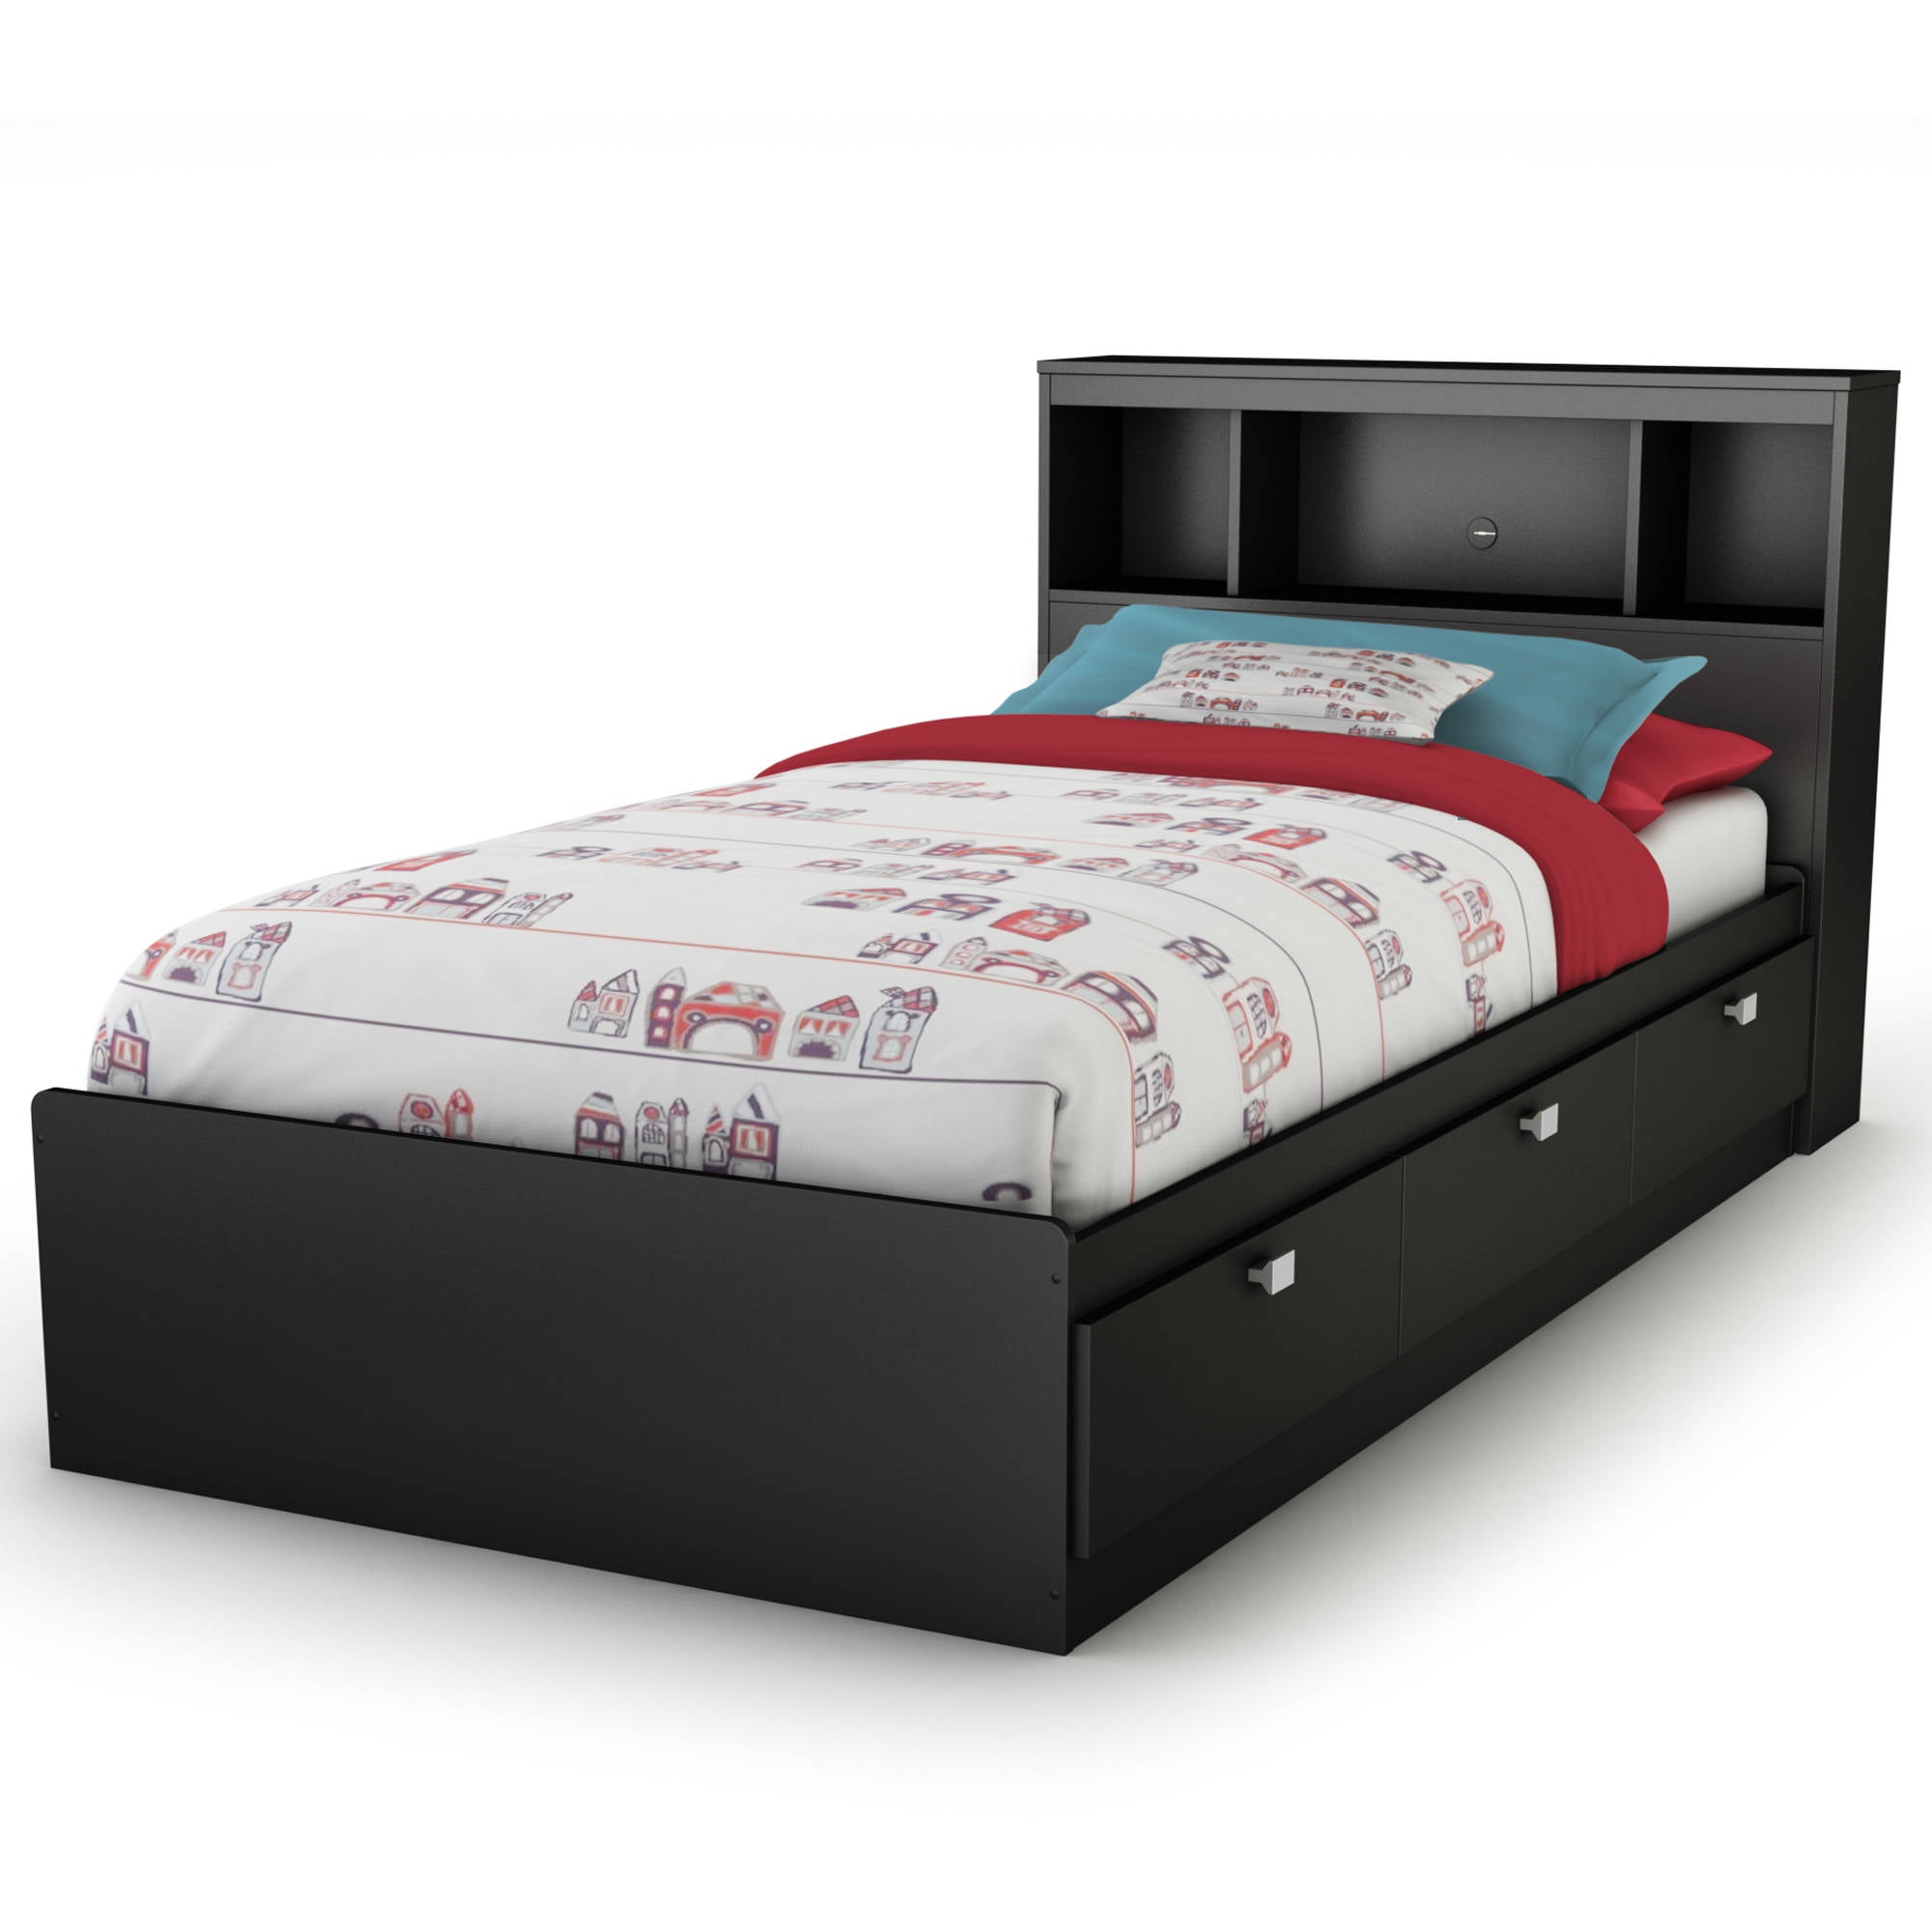 South S Spark 3 Drawer Storage Bed, King Bed Bookcase Headboard Storage